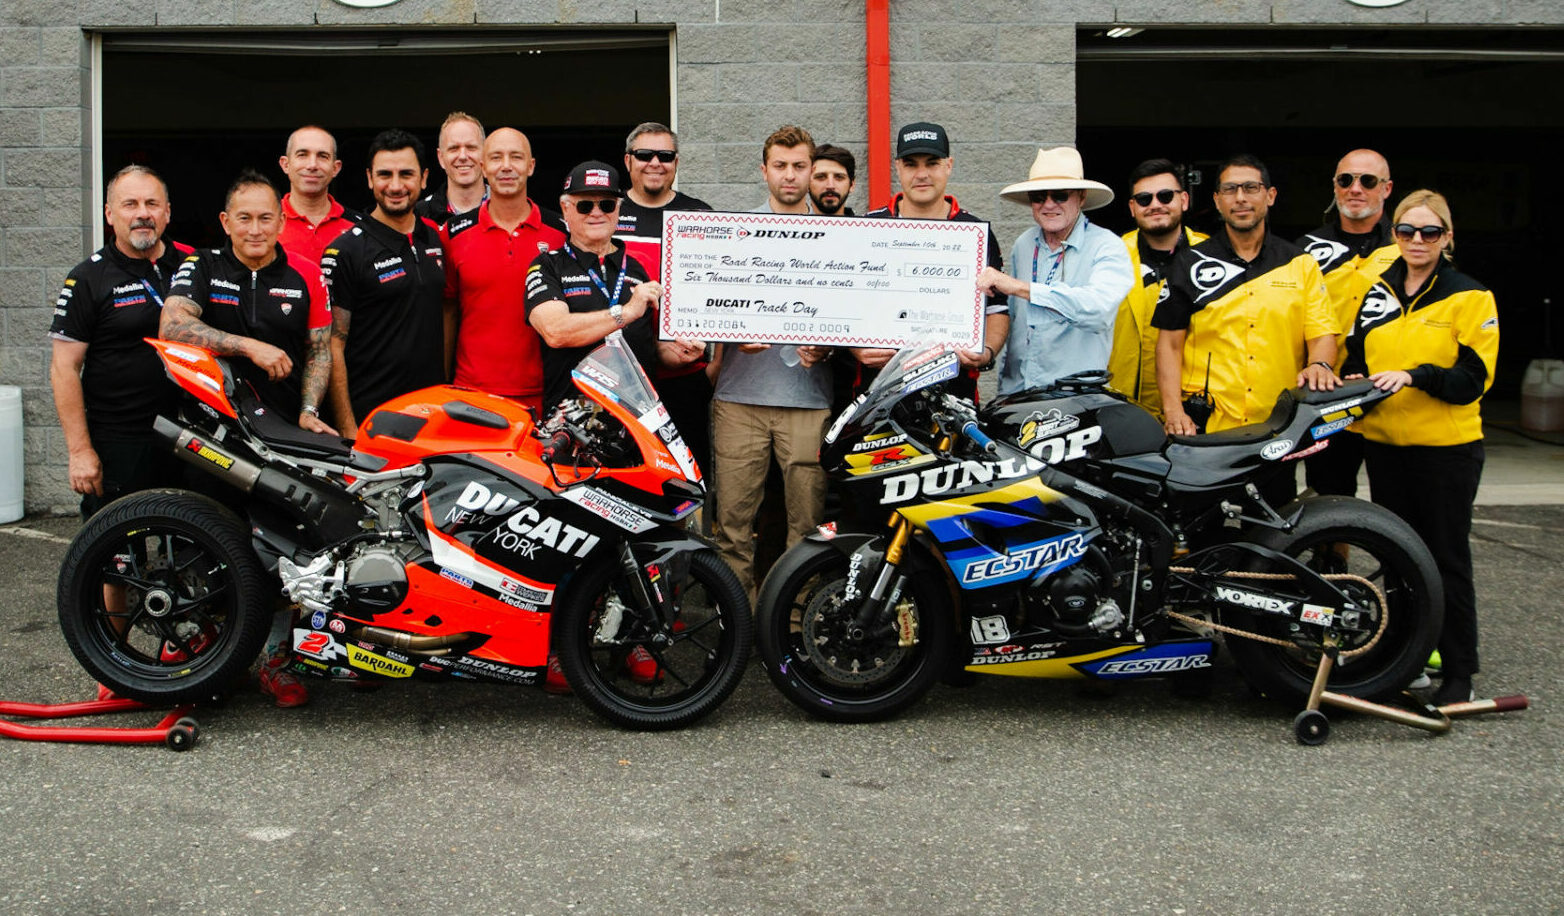 Members of the Warhorse HSBK Racing Ducati NYC race team and Dunlop’s MotoAmerica staff present a check for $6,000 to Roadracing World Action Fund (RWAF) founder John Ulrich September 11 at New Jersey Motorsports Park. Pictured (from left) are Warhorse Racing Ducati NYC race team members Maurizio Perlini, Michael Castro, Giovanni Crupi, Bobby Shek, David Behrend, Simone Toso, Eraldo Ferracci, Cody Chesebrough, Louis Denaples III, Marco Vilaro, RWAF Ambassador Chris Ulrich, RWAF Founder John Ulrich, and Dunlop’s Hunter Juico, Anthony Romo, Tom McMannis, and Cori Maynard behind Josh Herrin's Ducati Panigale V2 Supersport racebike and the Dunlop ECSTAR Suzuki GSX-R1000R two-seat Superbike, a fund-raising tool of the Roadracing World Action Fund. Photo courtesy Dunlop.